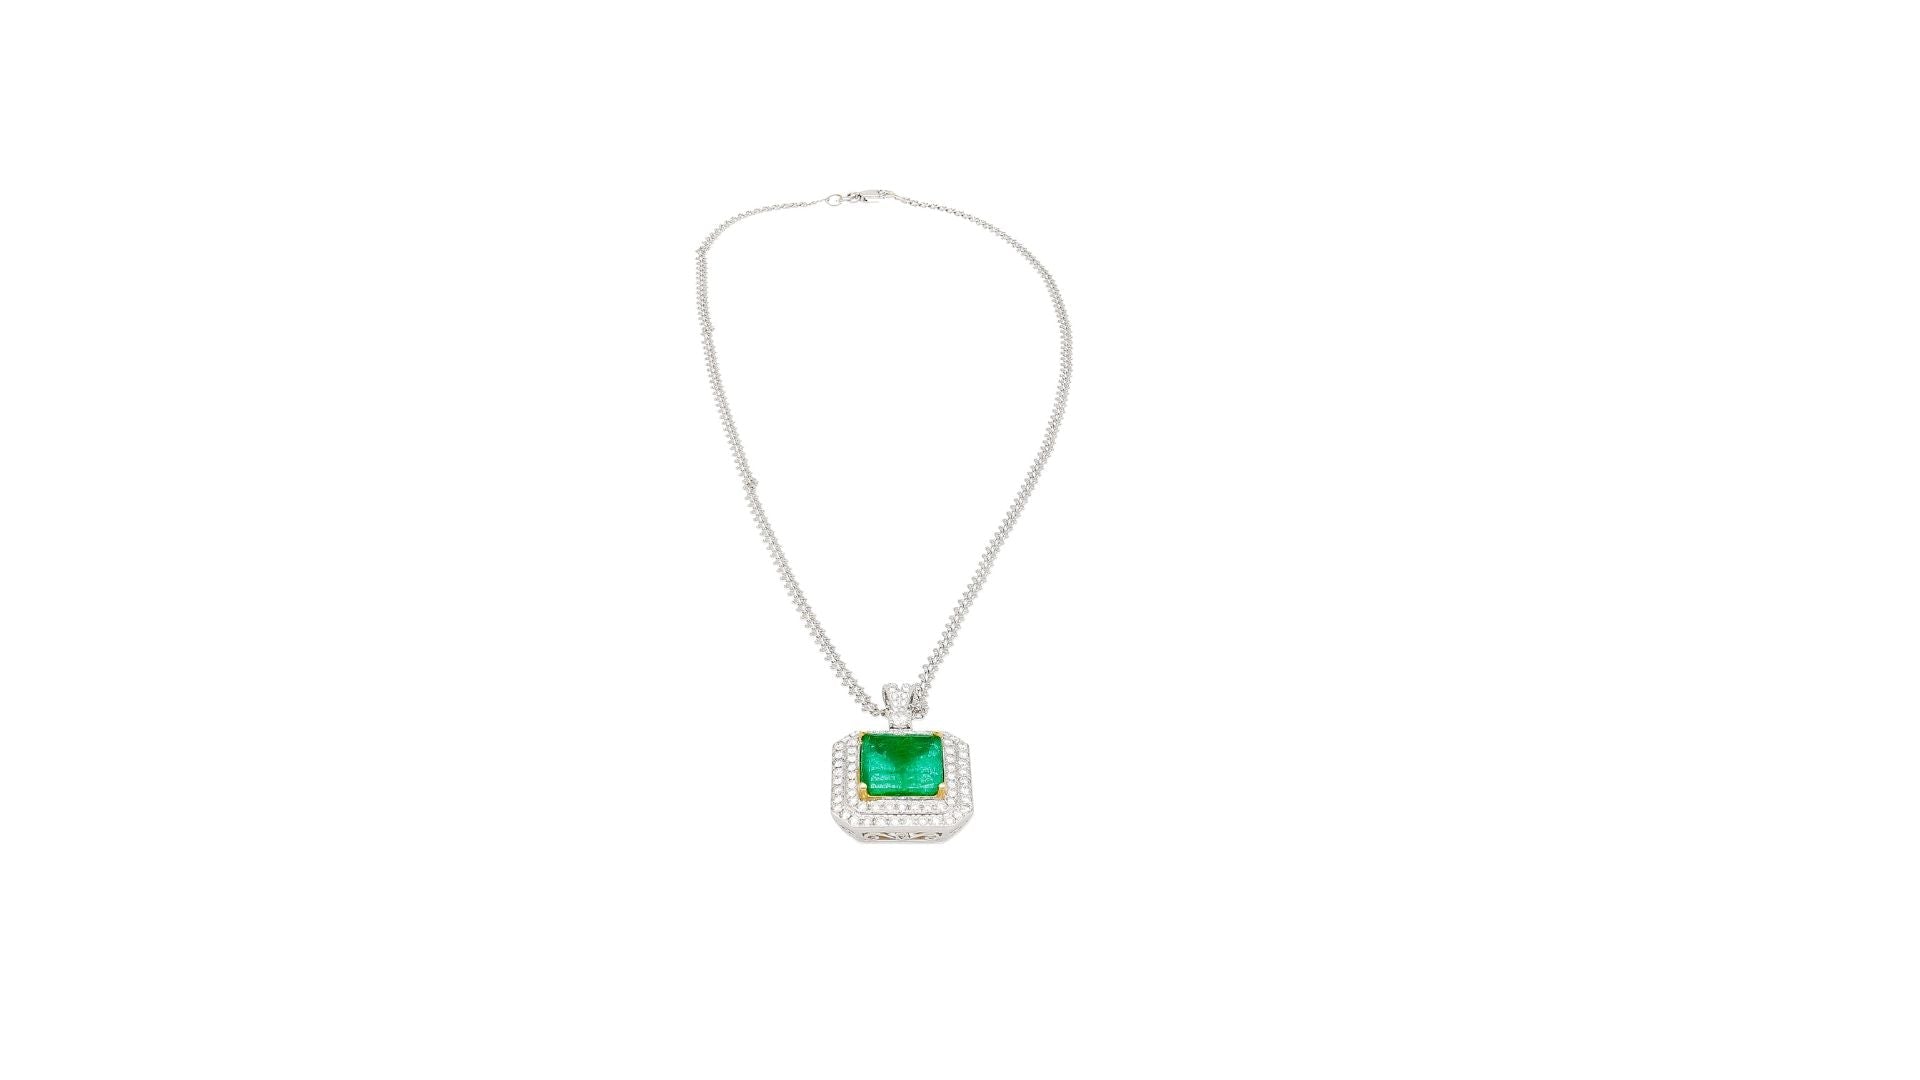 GIA Certified 6.33 Carat Minor Oil Colombian Emerald Necklace in 18K White Gold